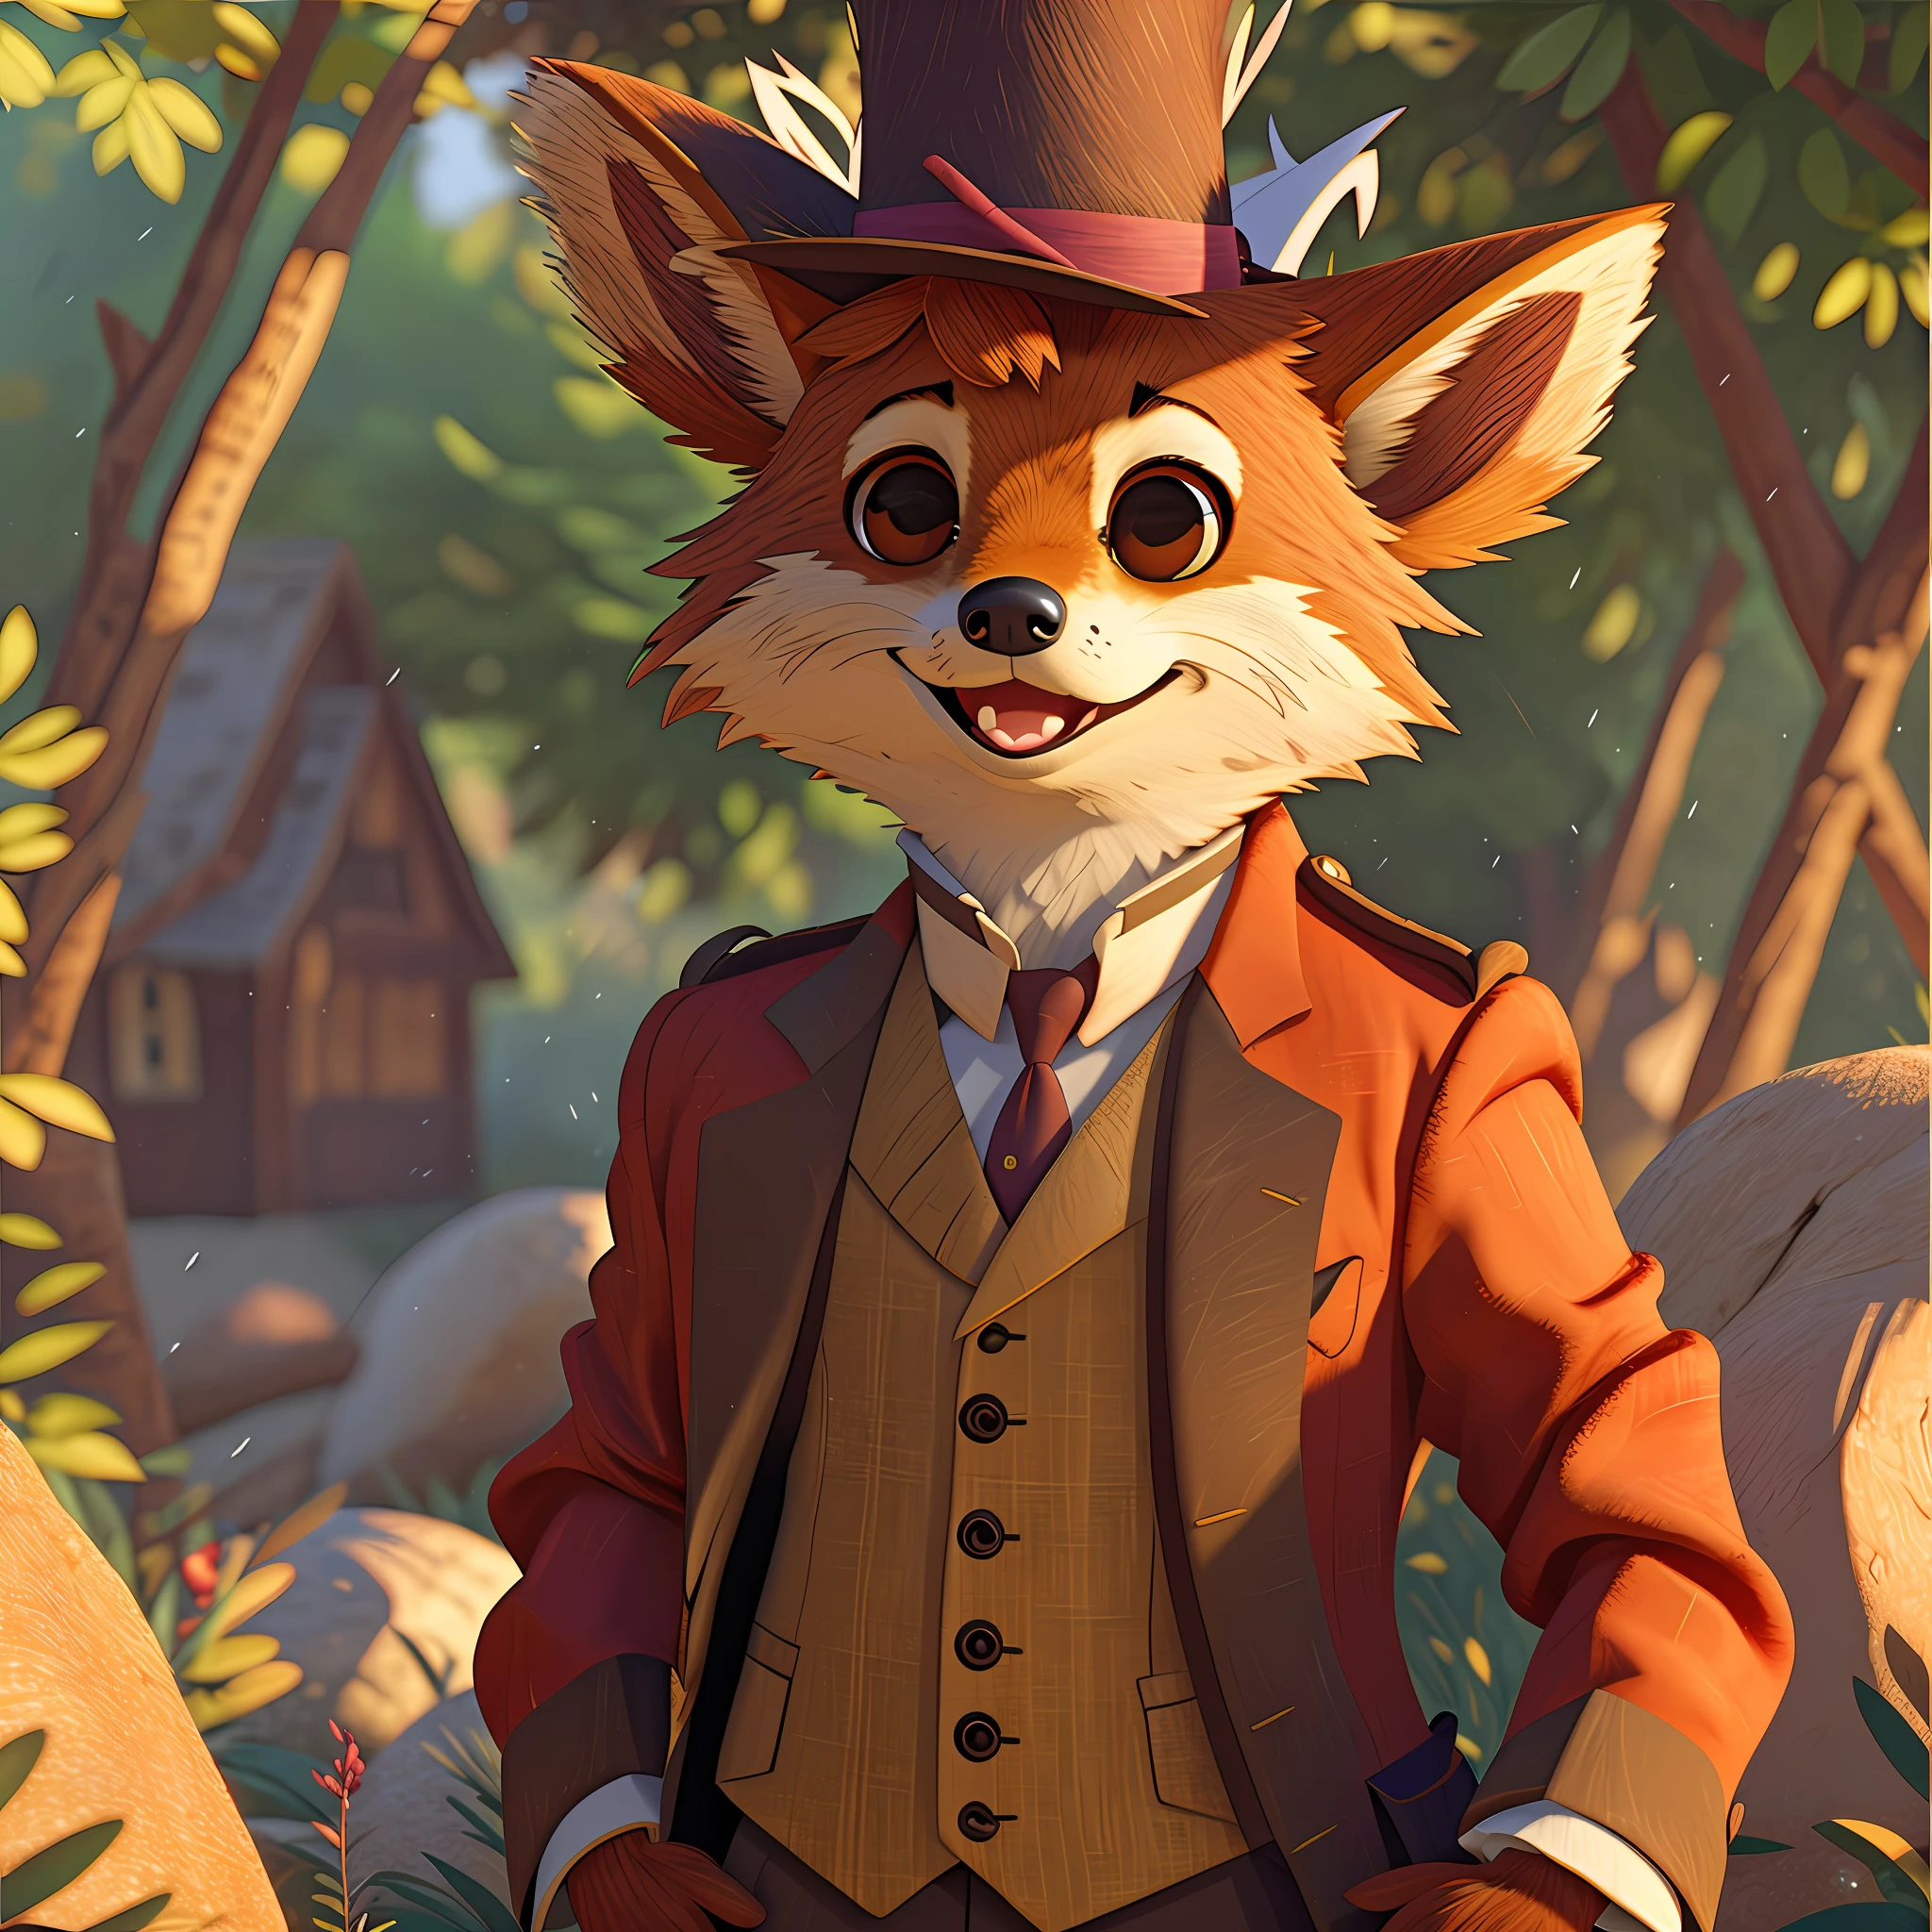 masterpiece, 8k resolution], (a coyote wearing a victorian suit), [surprised expression], [athletic thin body]